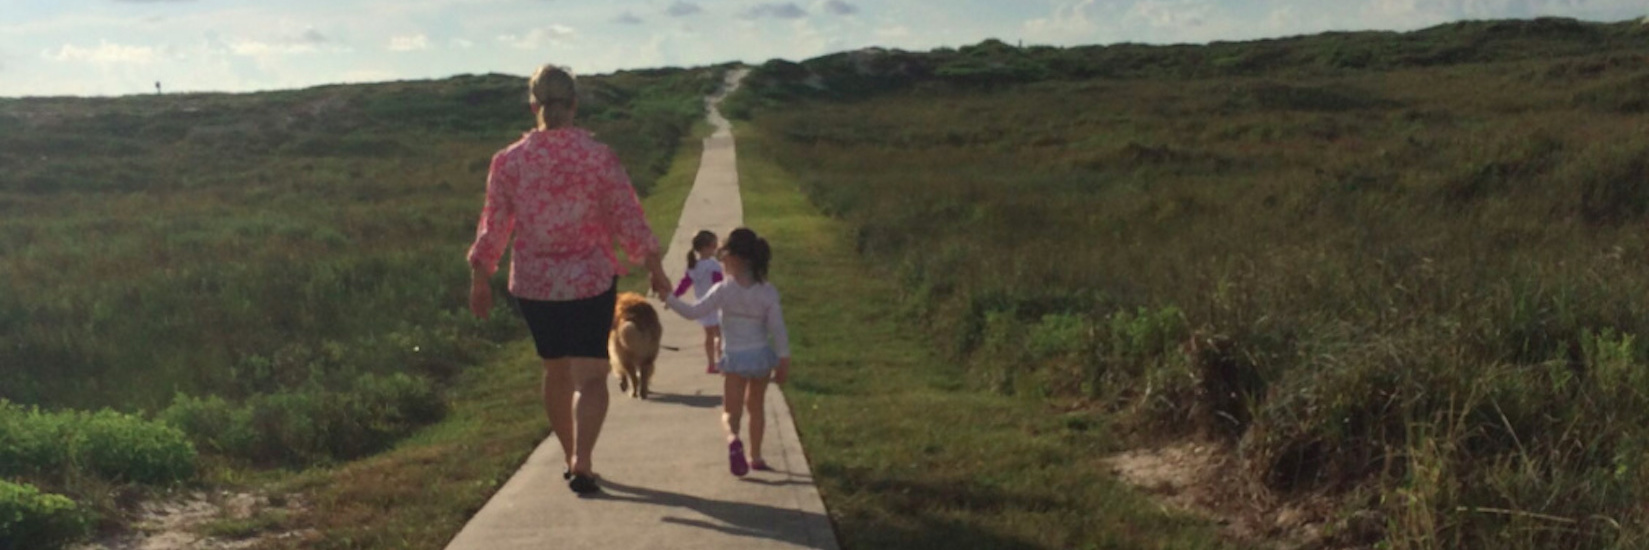 Mother holding daughter's or granddaughter's hand, walking with daughters or granddaughters down path surrounded by grass during the daytime